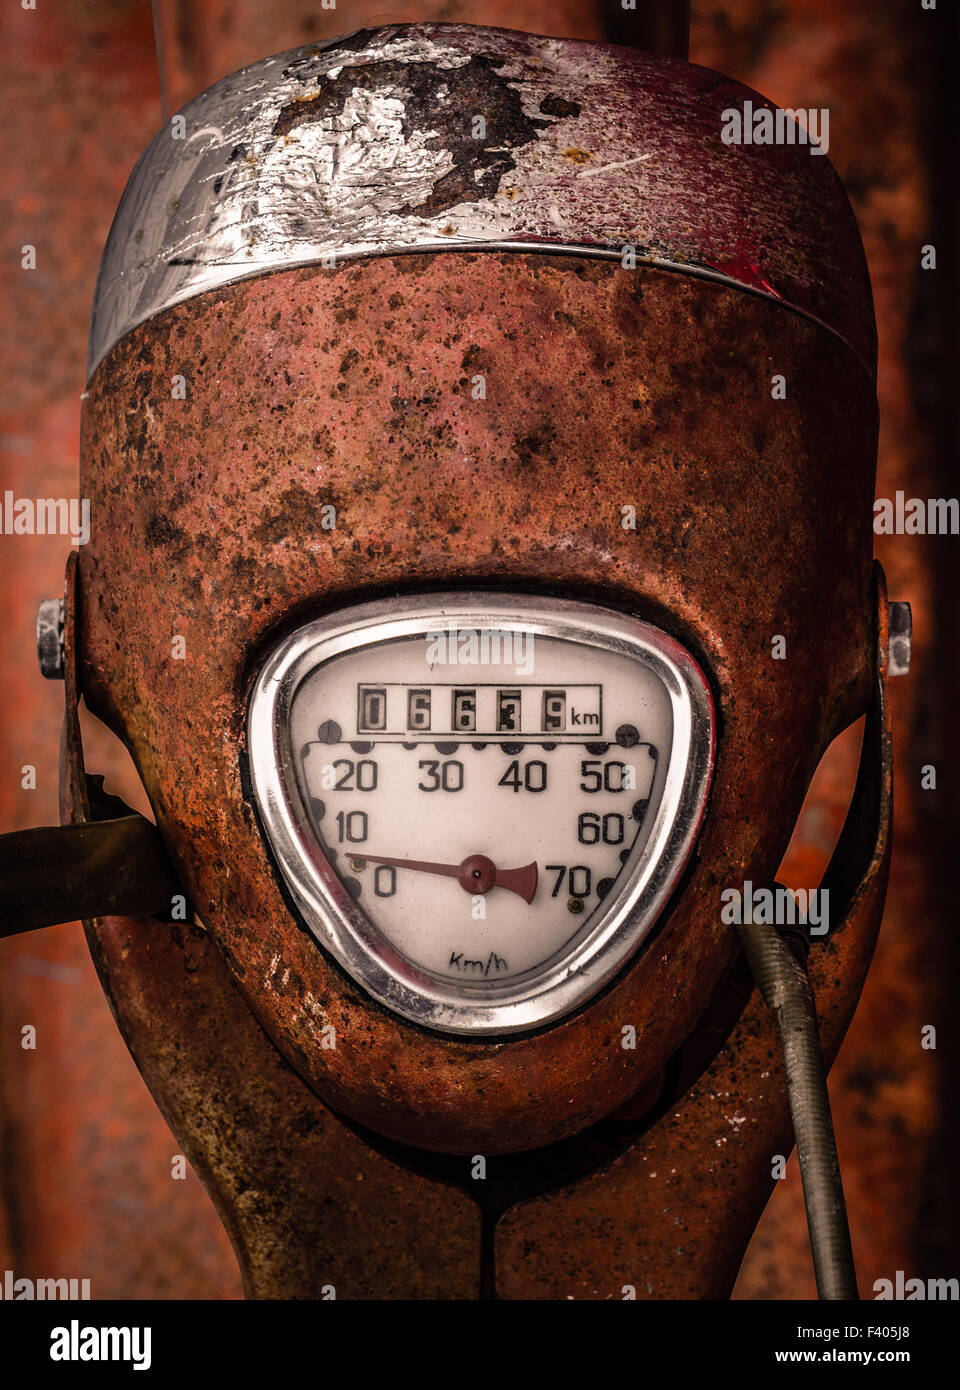 Rustic Speedometer Dial On Vintage Scooter Stock Photo